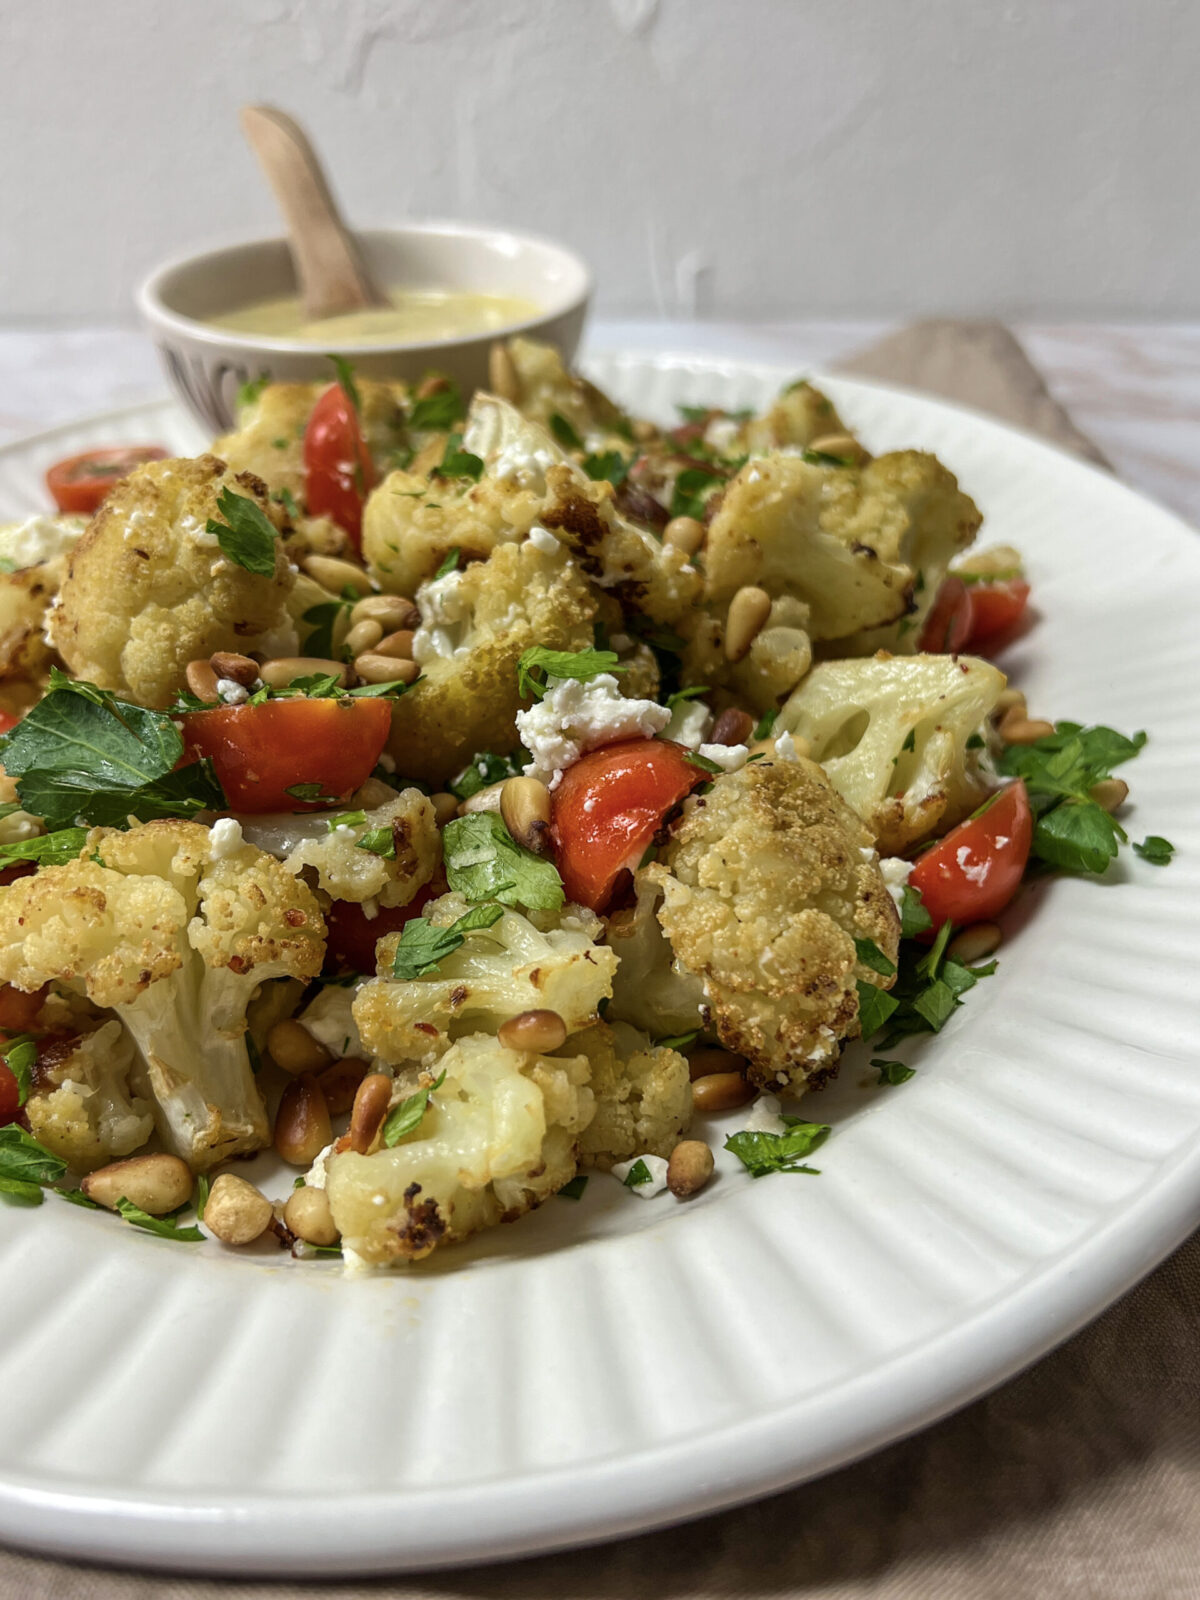 A colorful plate of Mediterranean Roasted Cauliflower Salad with Tomatoes and Feta Cheese.